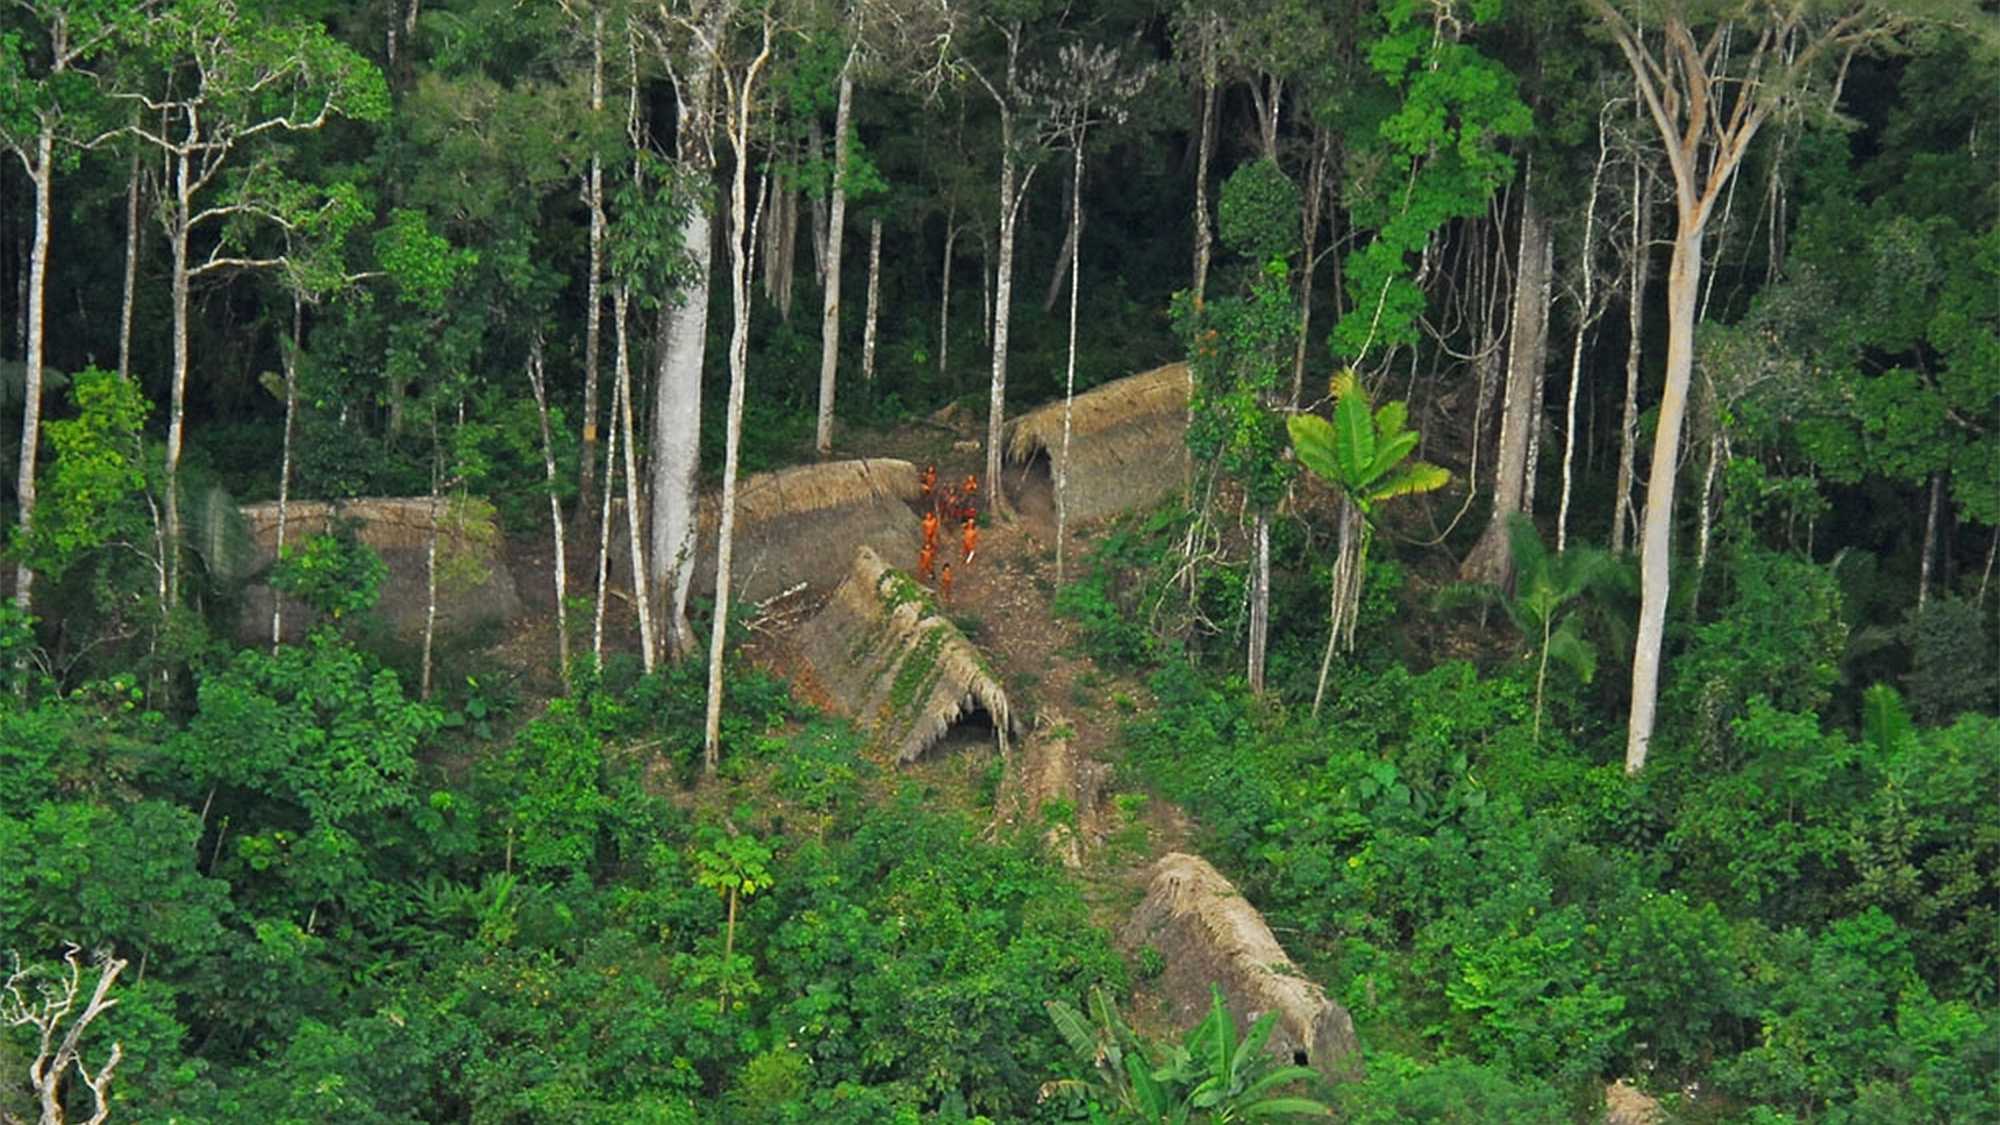 Uncontacted Indigenous community in the Brazilian state of Acre. Image by Gleilson Miranda / Wikimedia Commons (CC BY 2.0).